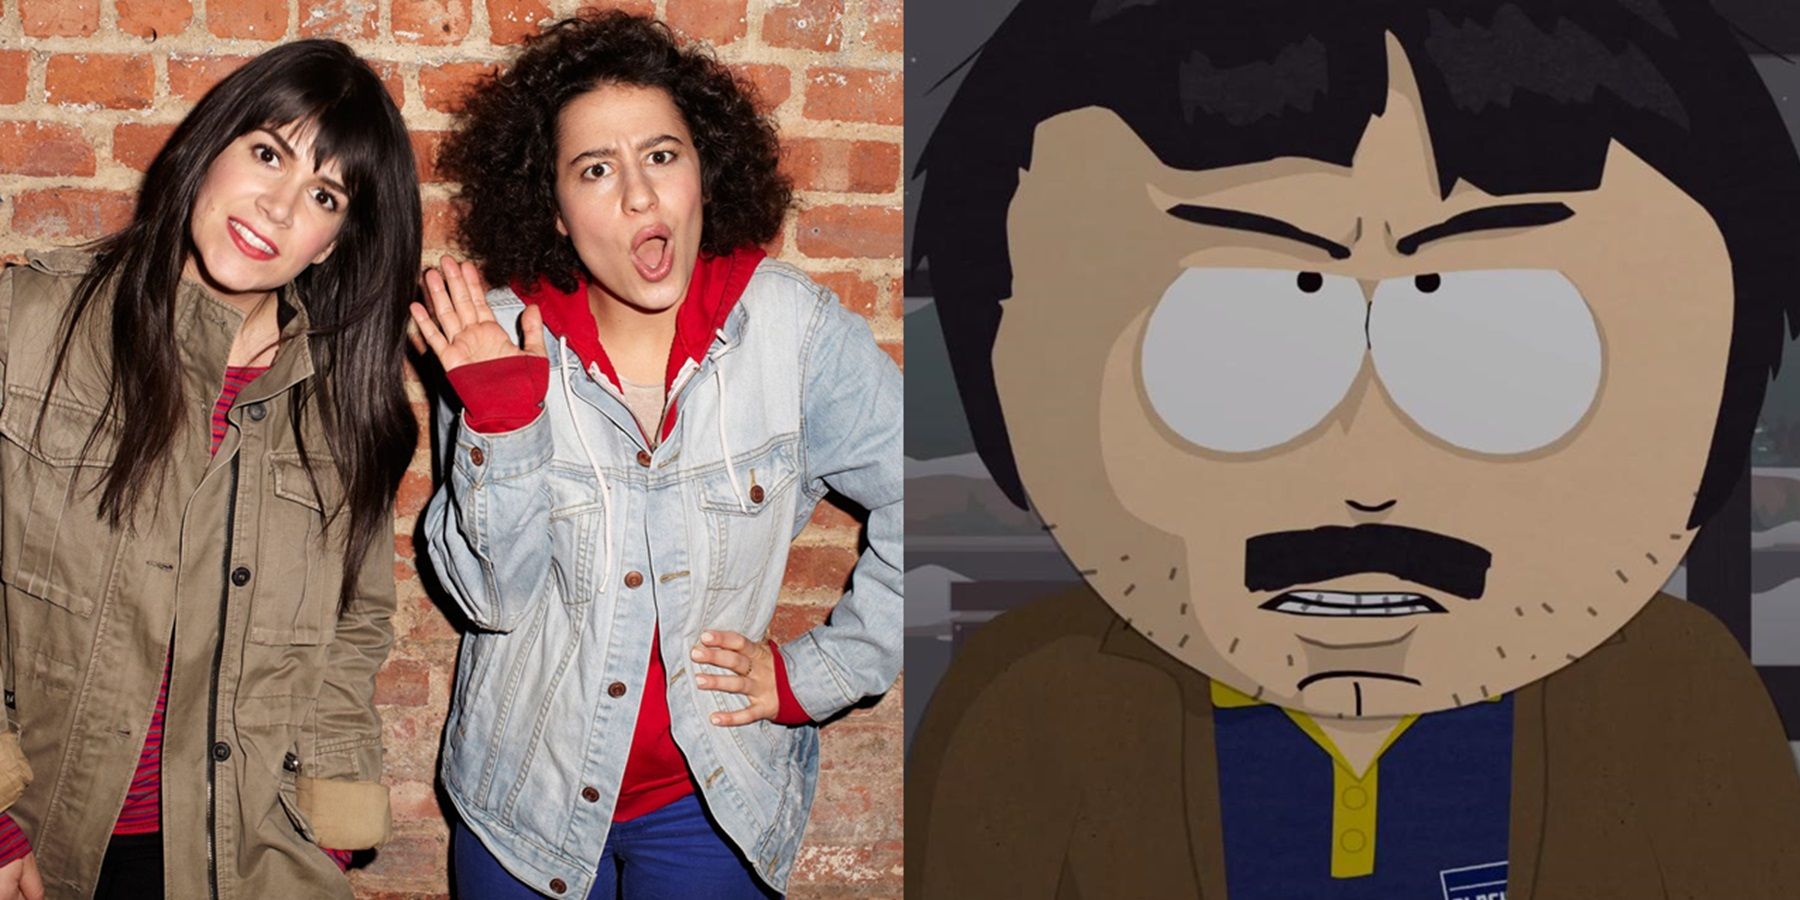 The 10 Funniest Characters From Comedy Central Shows Ranked